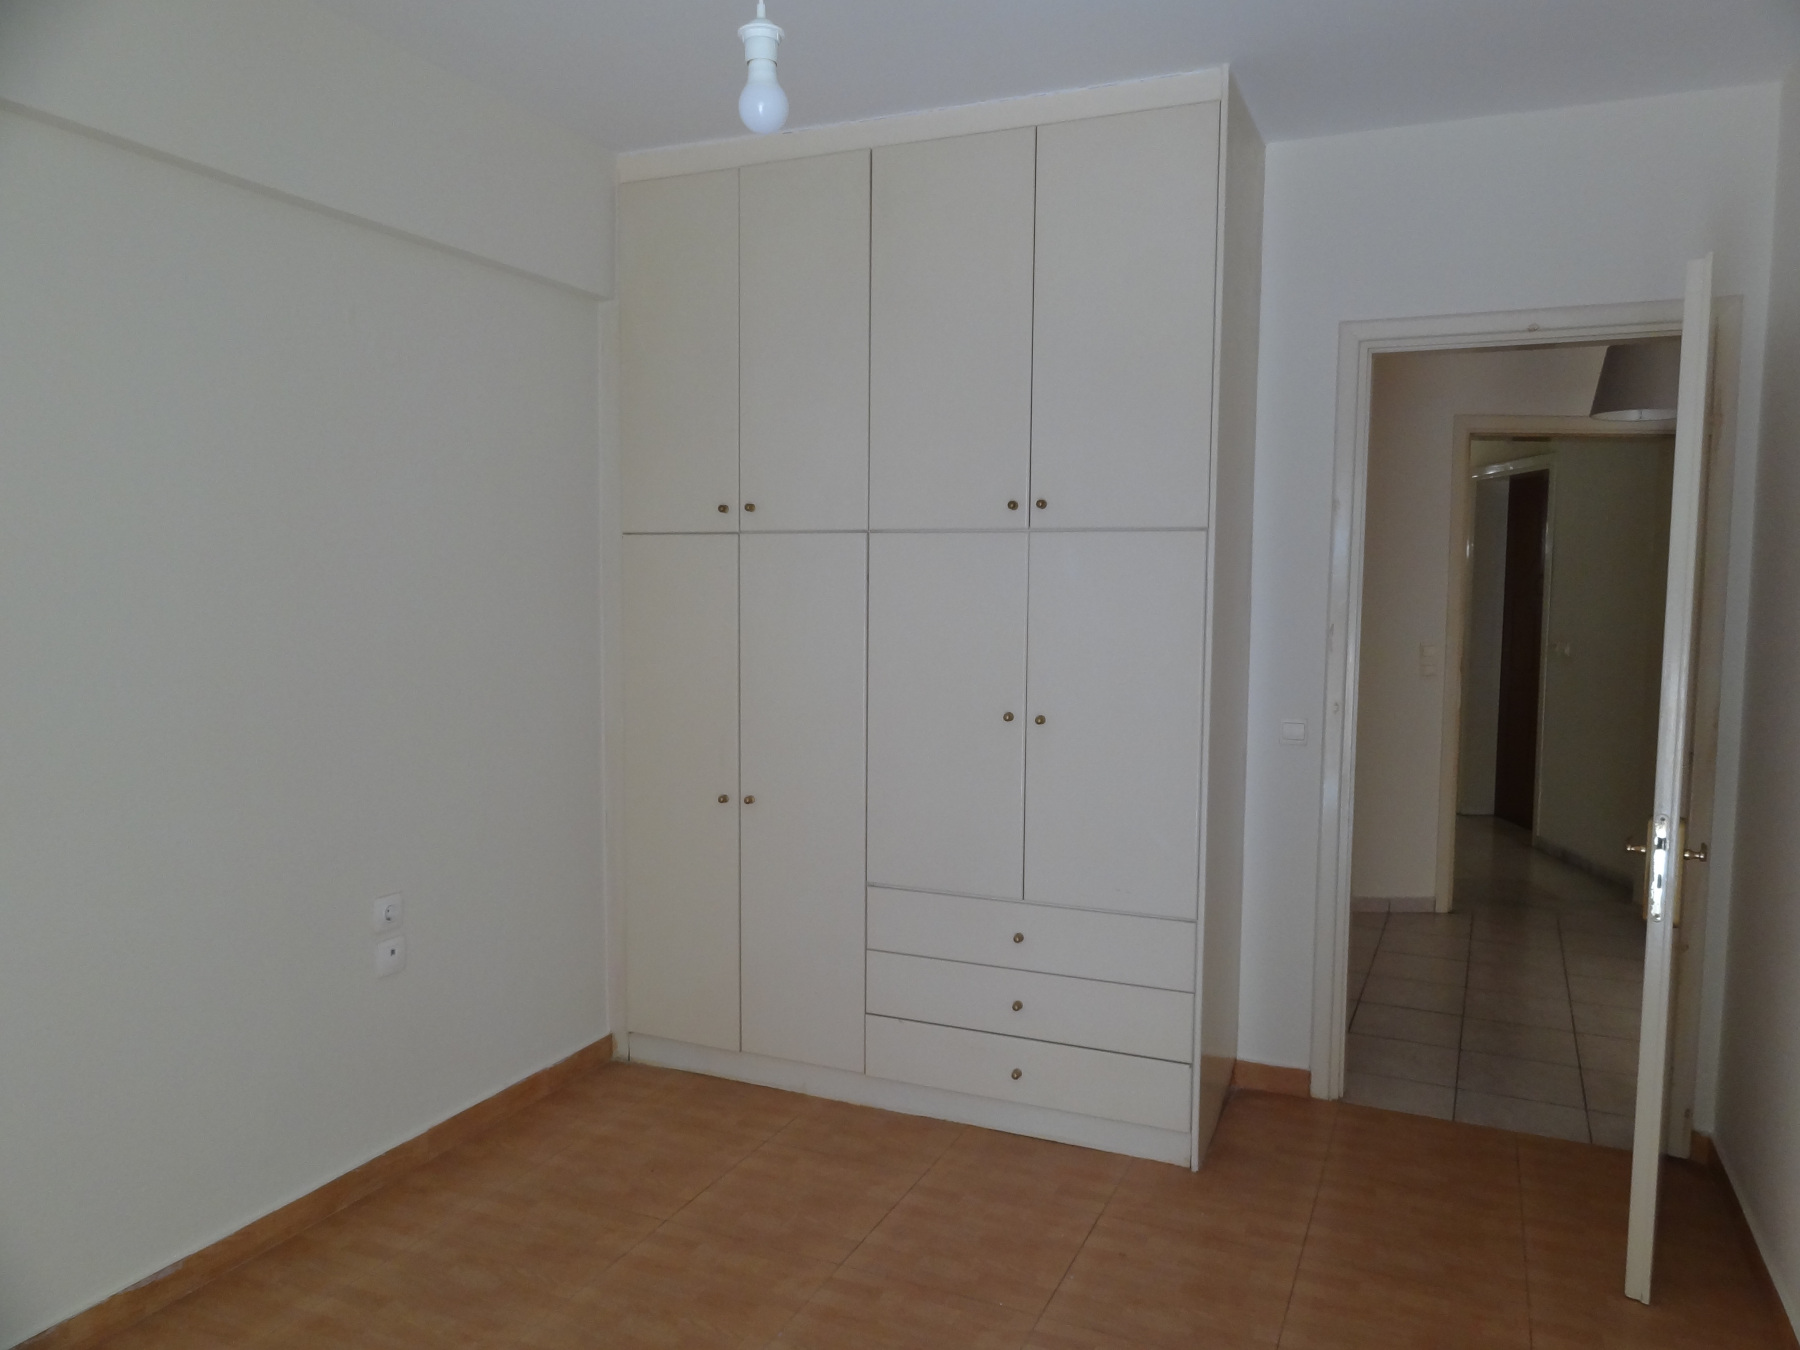 Apartment for rent 55 sq.m. 1st floor near the KTEL station in Ioannina